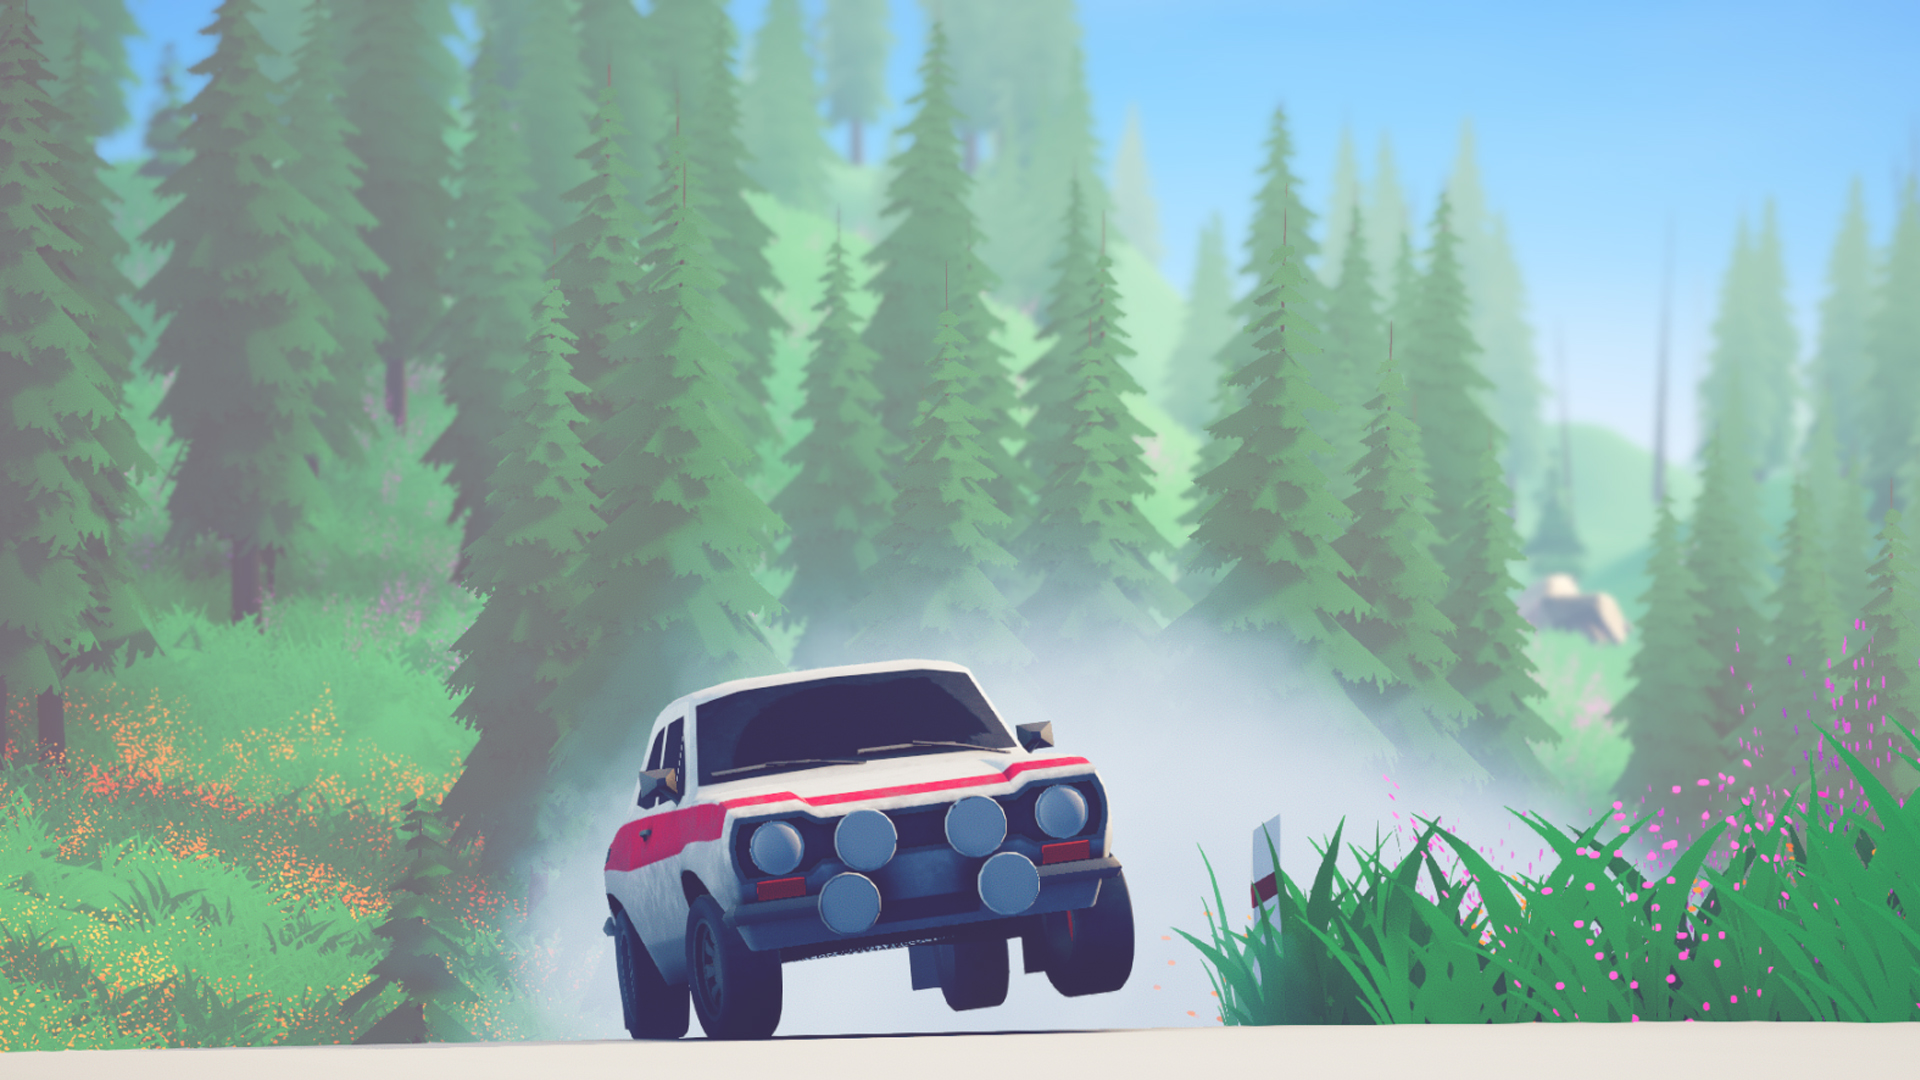 switch art of rally